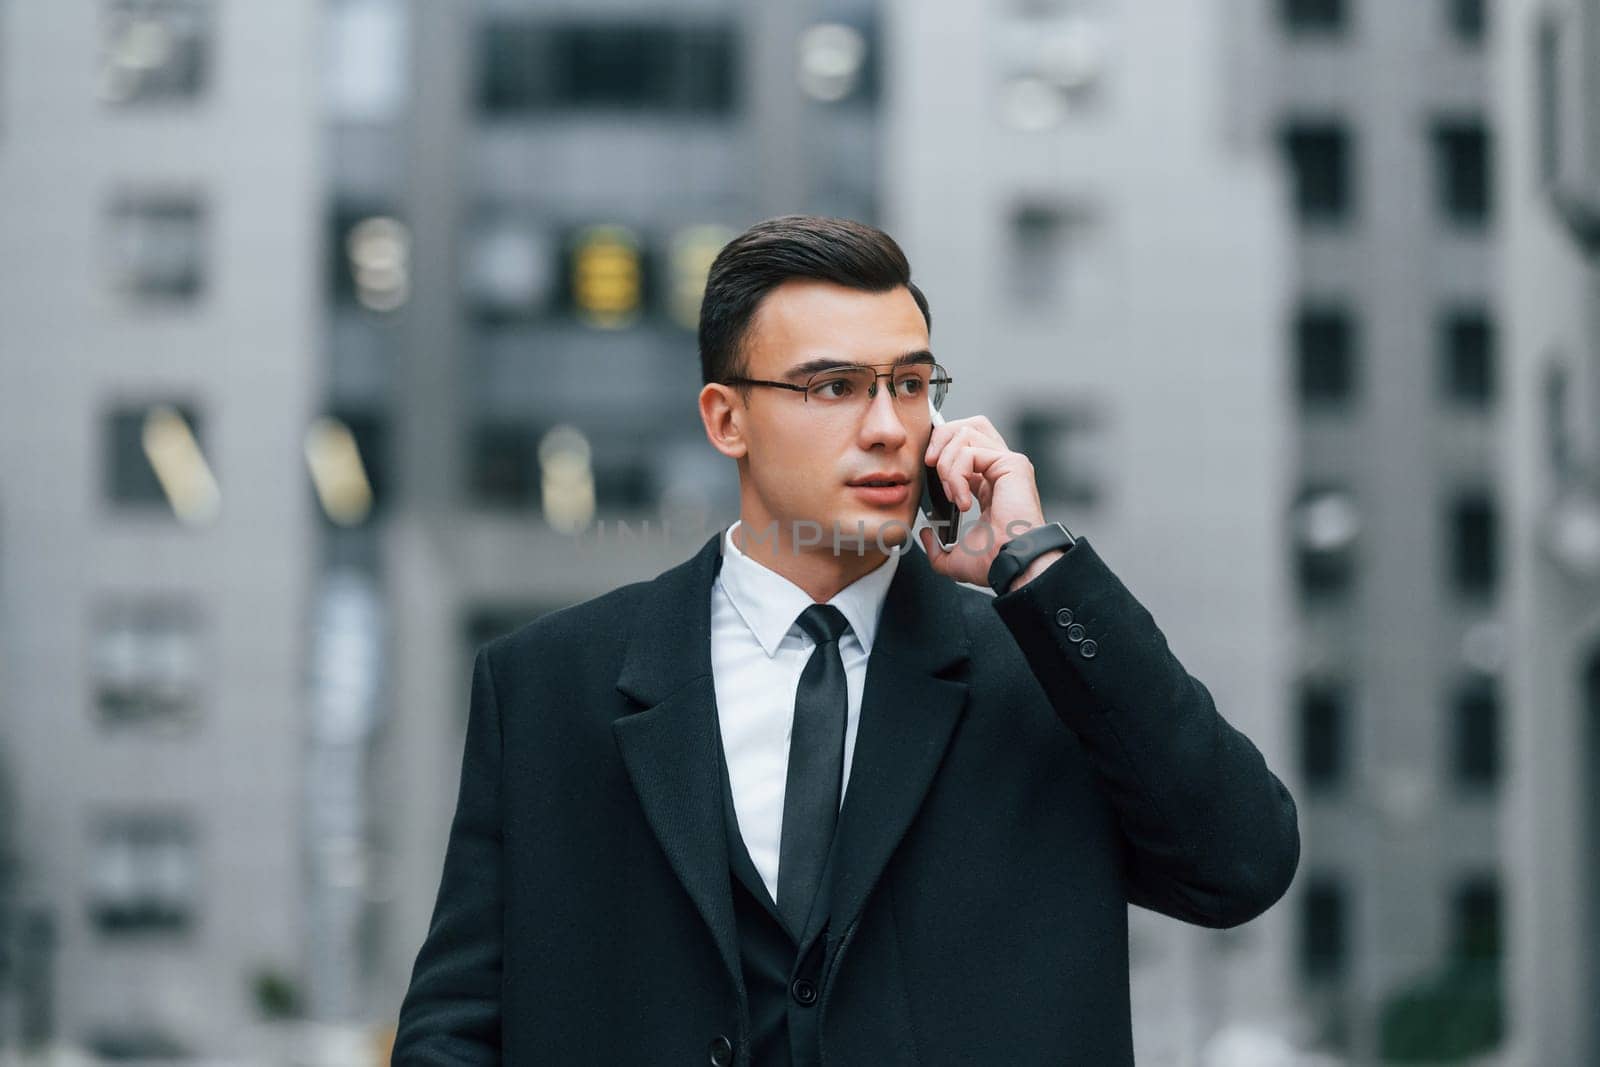 Talking by phone. Businessman in black suit and tie is outdoors in the city.